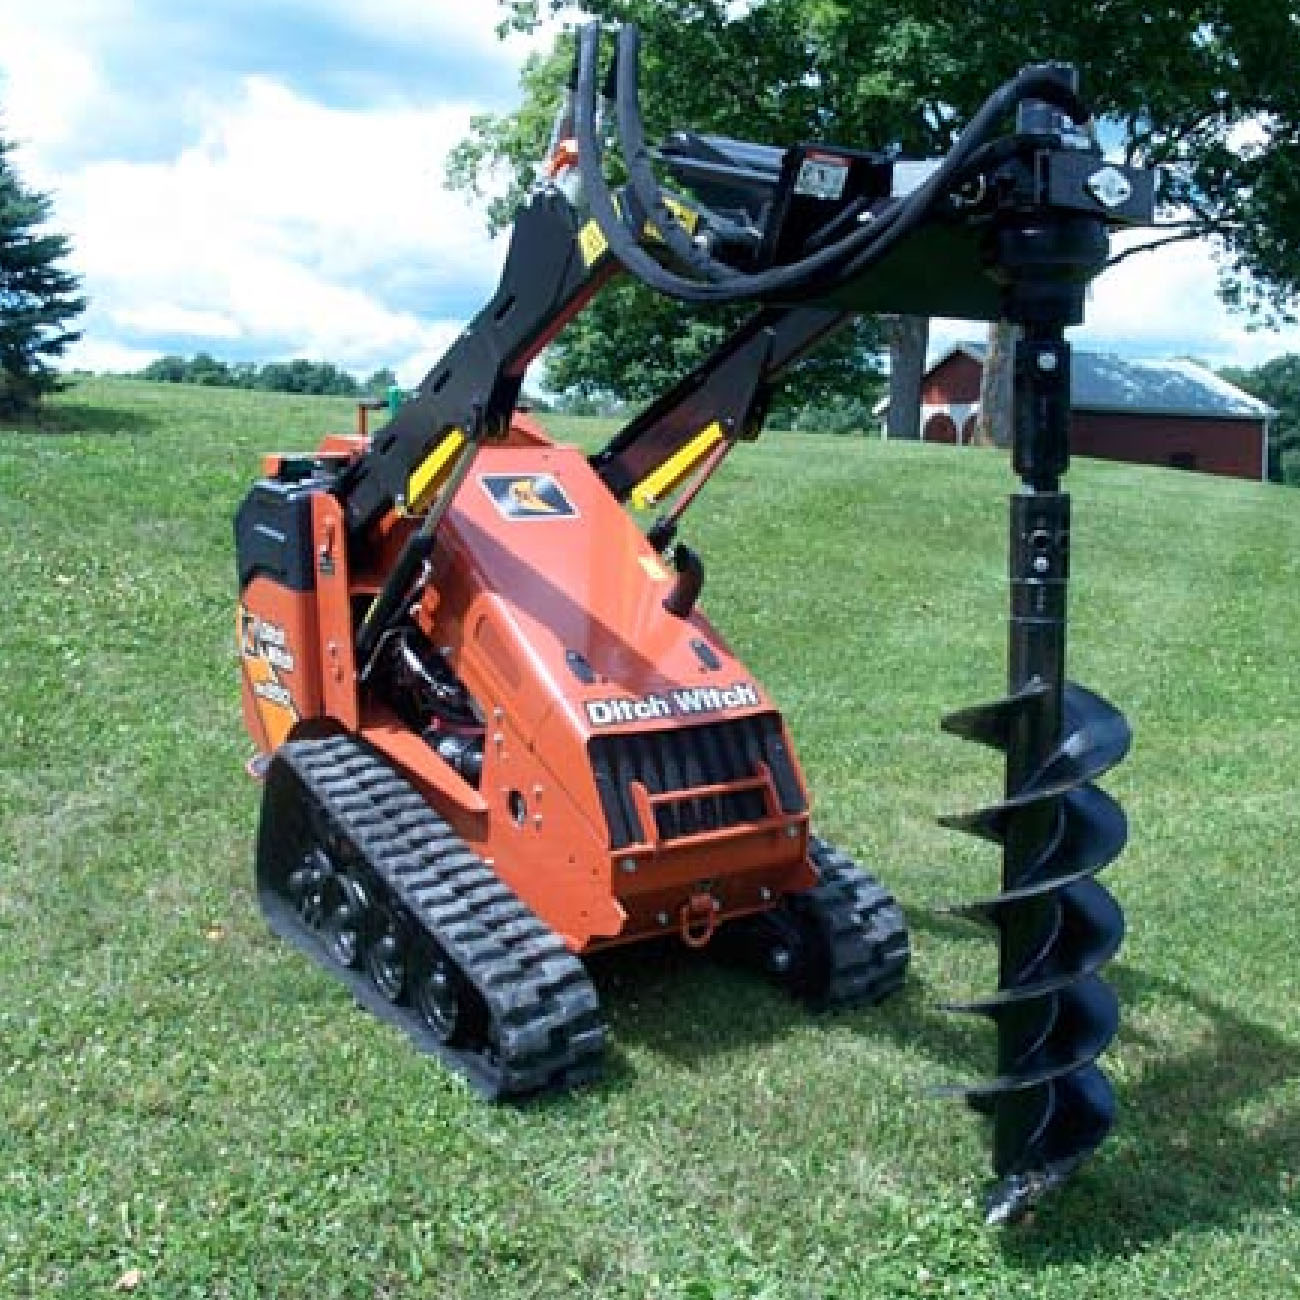 Featured image for “Post Digger Attachment”